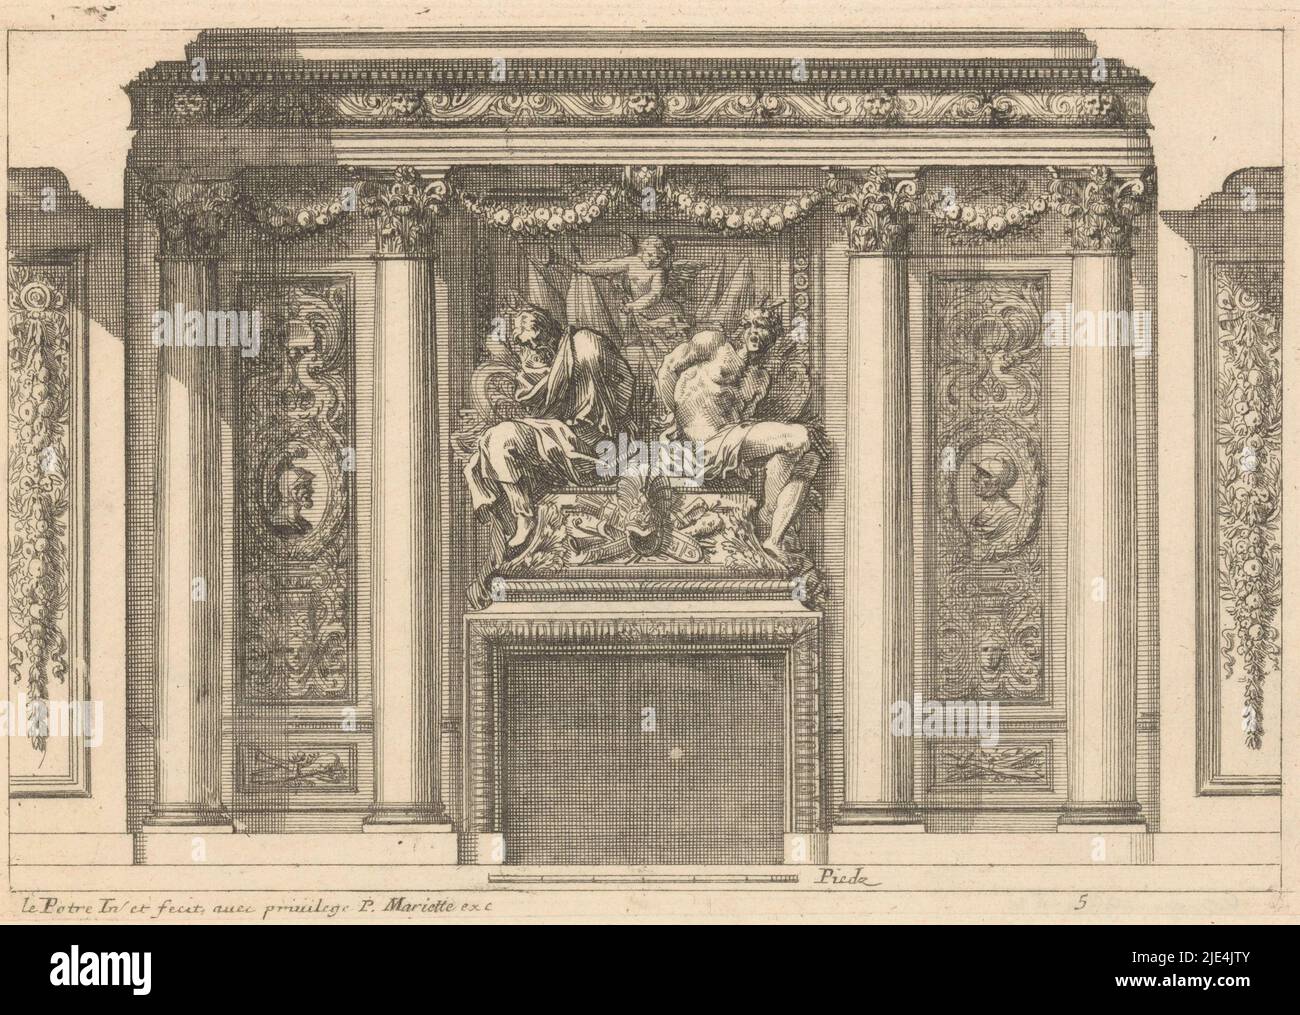 Fireplace with two chained prisoners, Jean Lepautre, 1658 - 1670, Cross section of a room with a fireplace with two chained figures in front of an armorial trophy. On the left and right two Corinthian columns., print maker: Jean Lepautre, (mentioned on object), Jean Lepautre, (mentioned on object), publisher: Pierre Mariette (II), (mentioned on object), Paris, 1658 - 1670, paper, etching, h 146 mm × w 216 mm Stock Photo